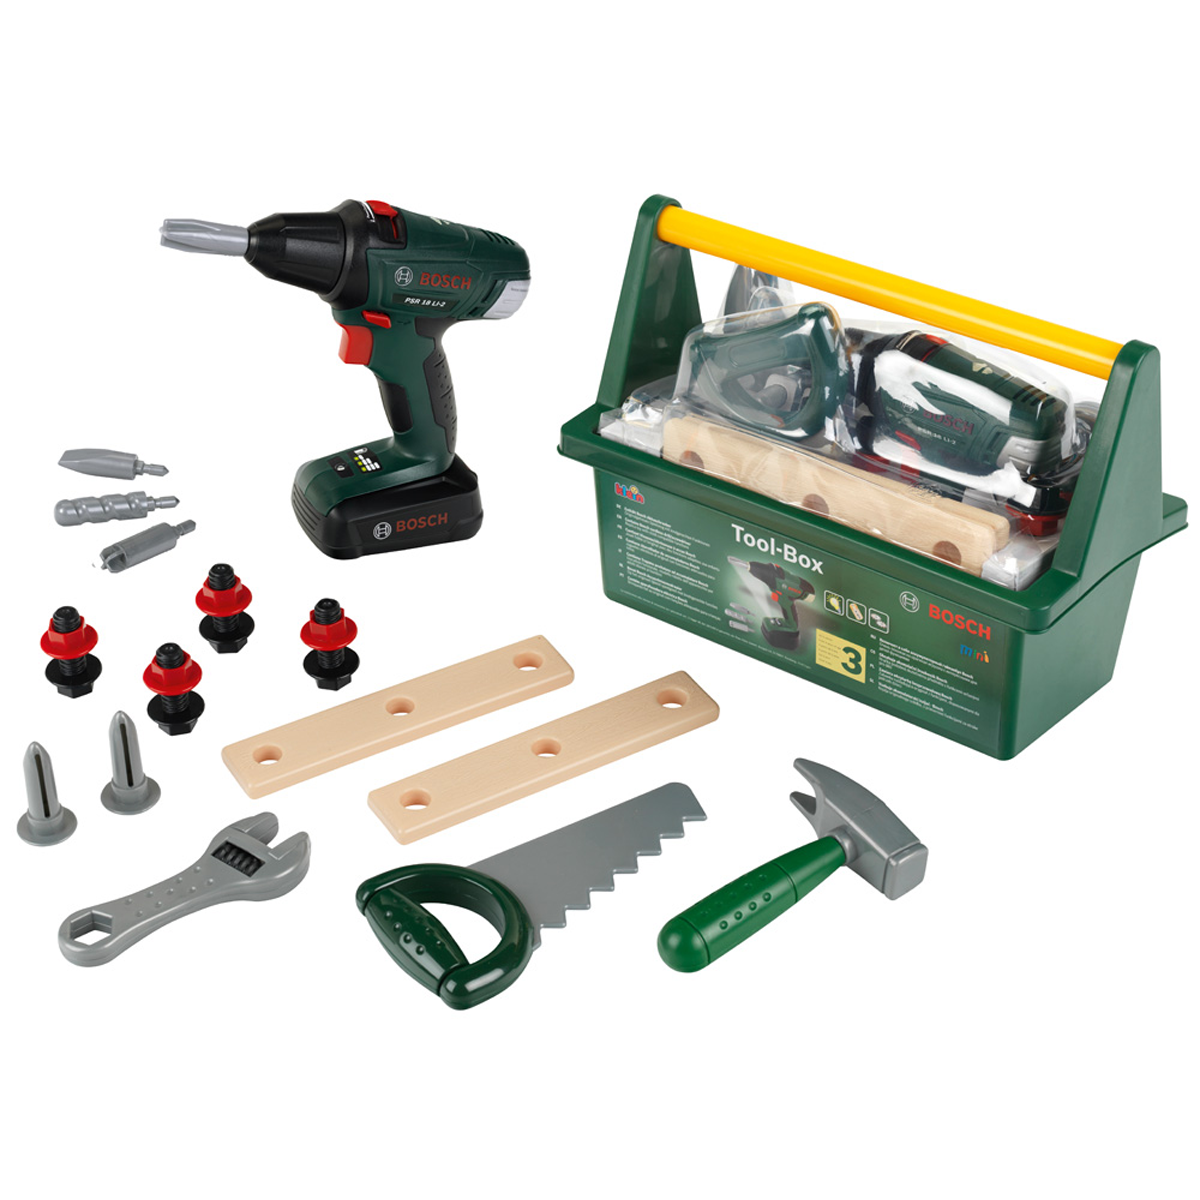 Bosch Tool Box | Early Learning Centre